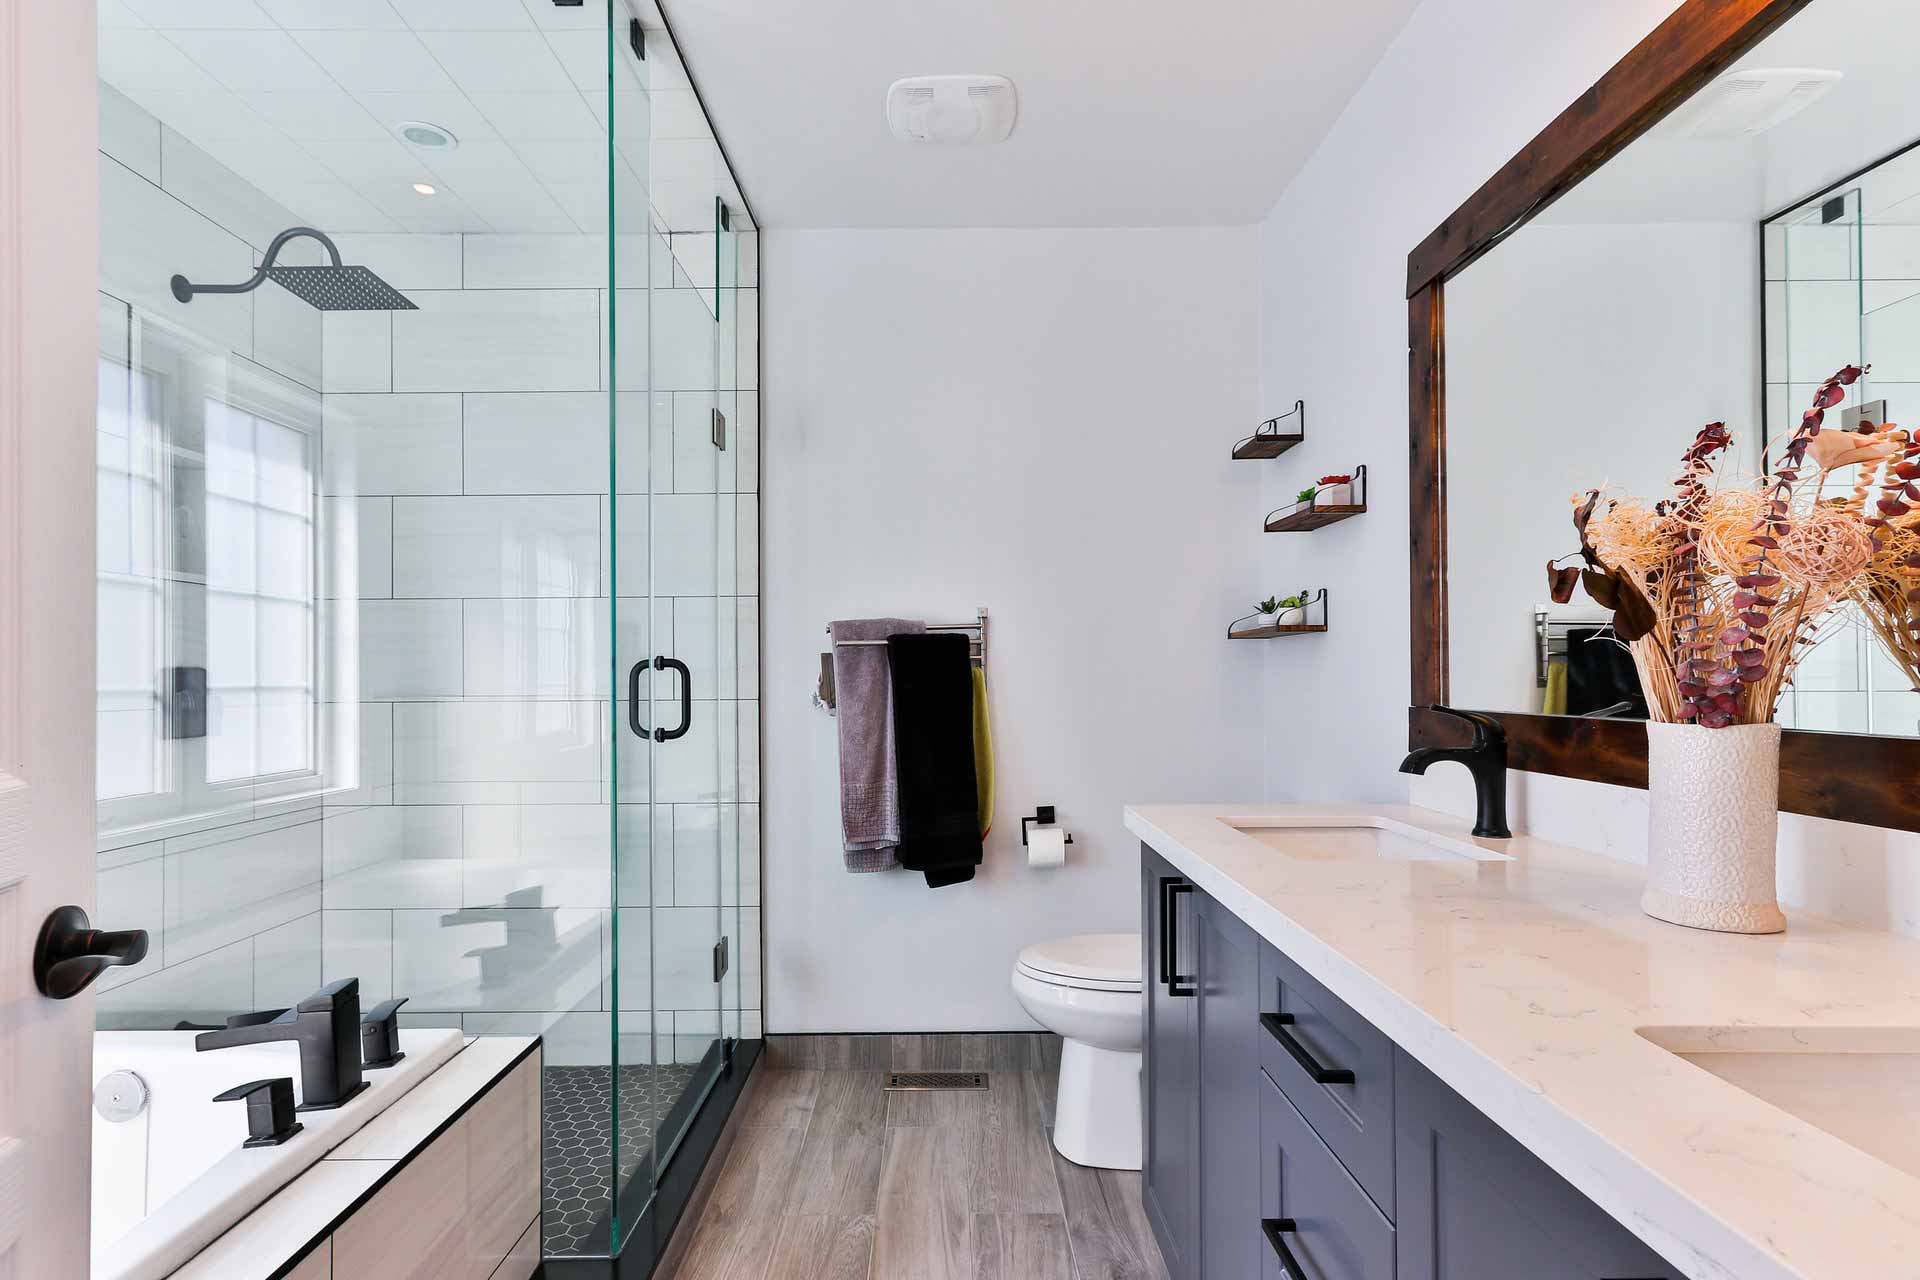 A newly renovated bathroom with dark wood accents